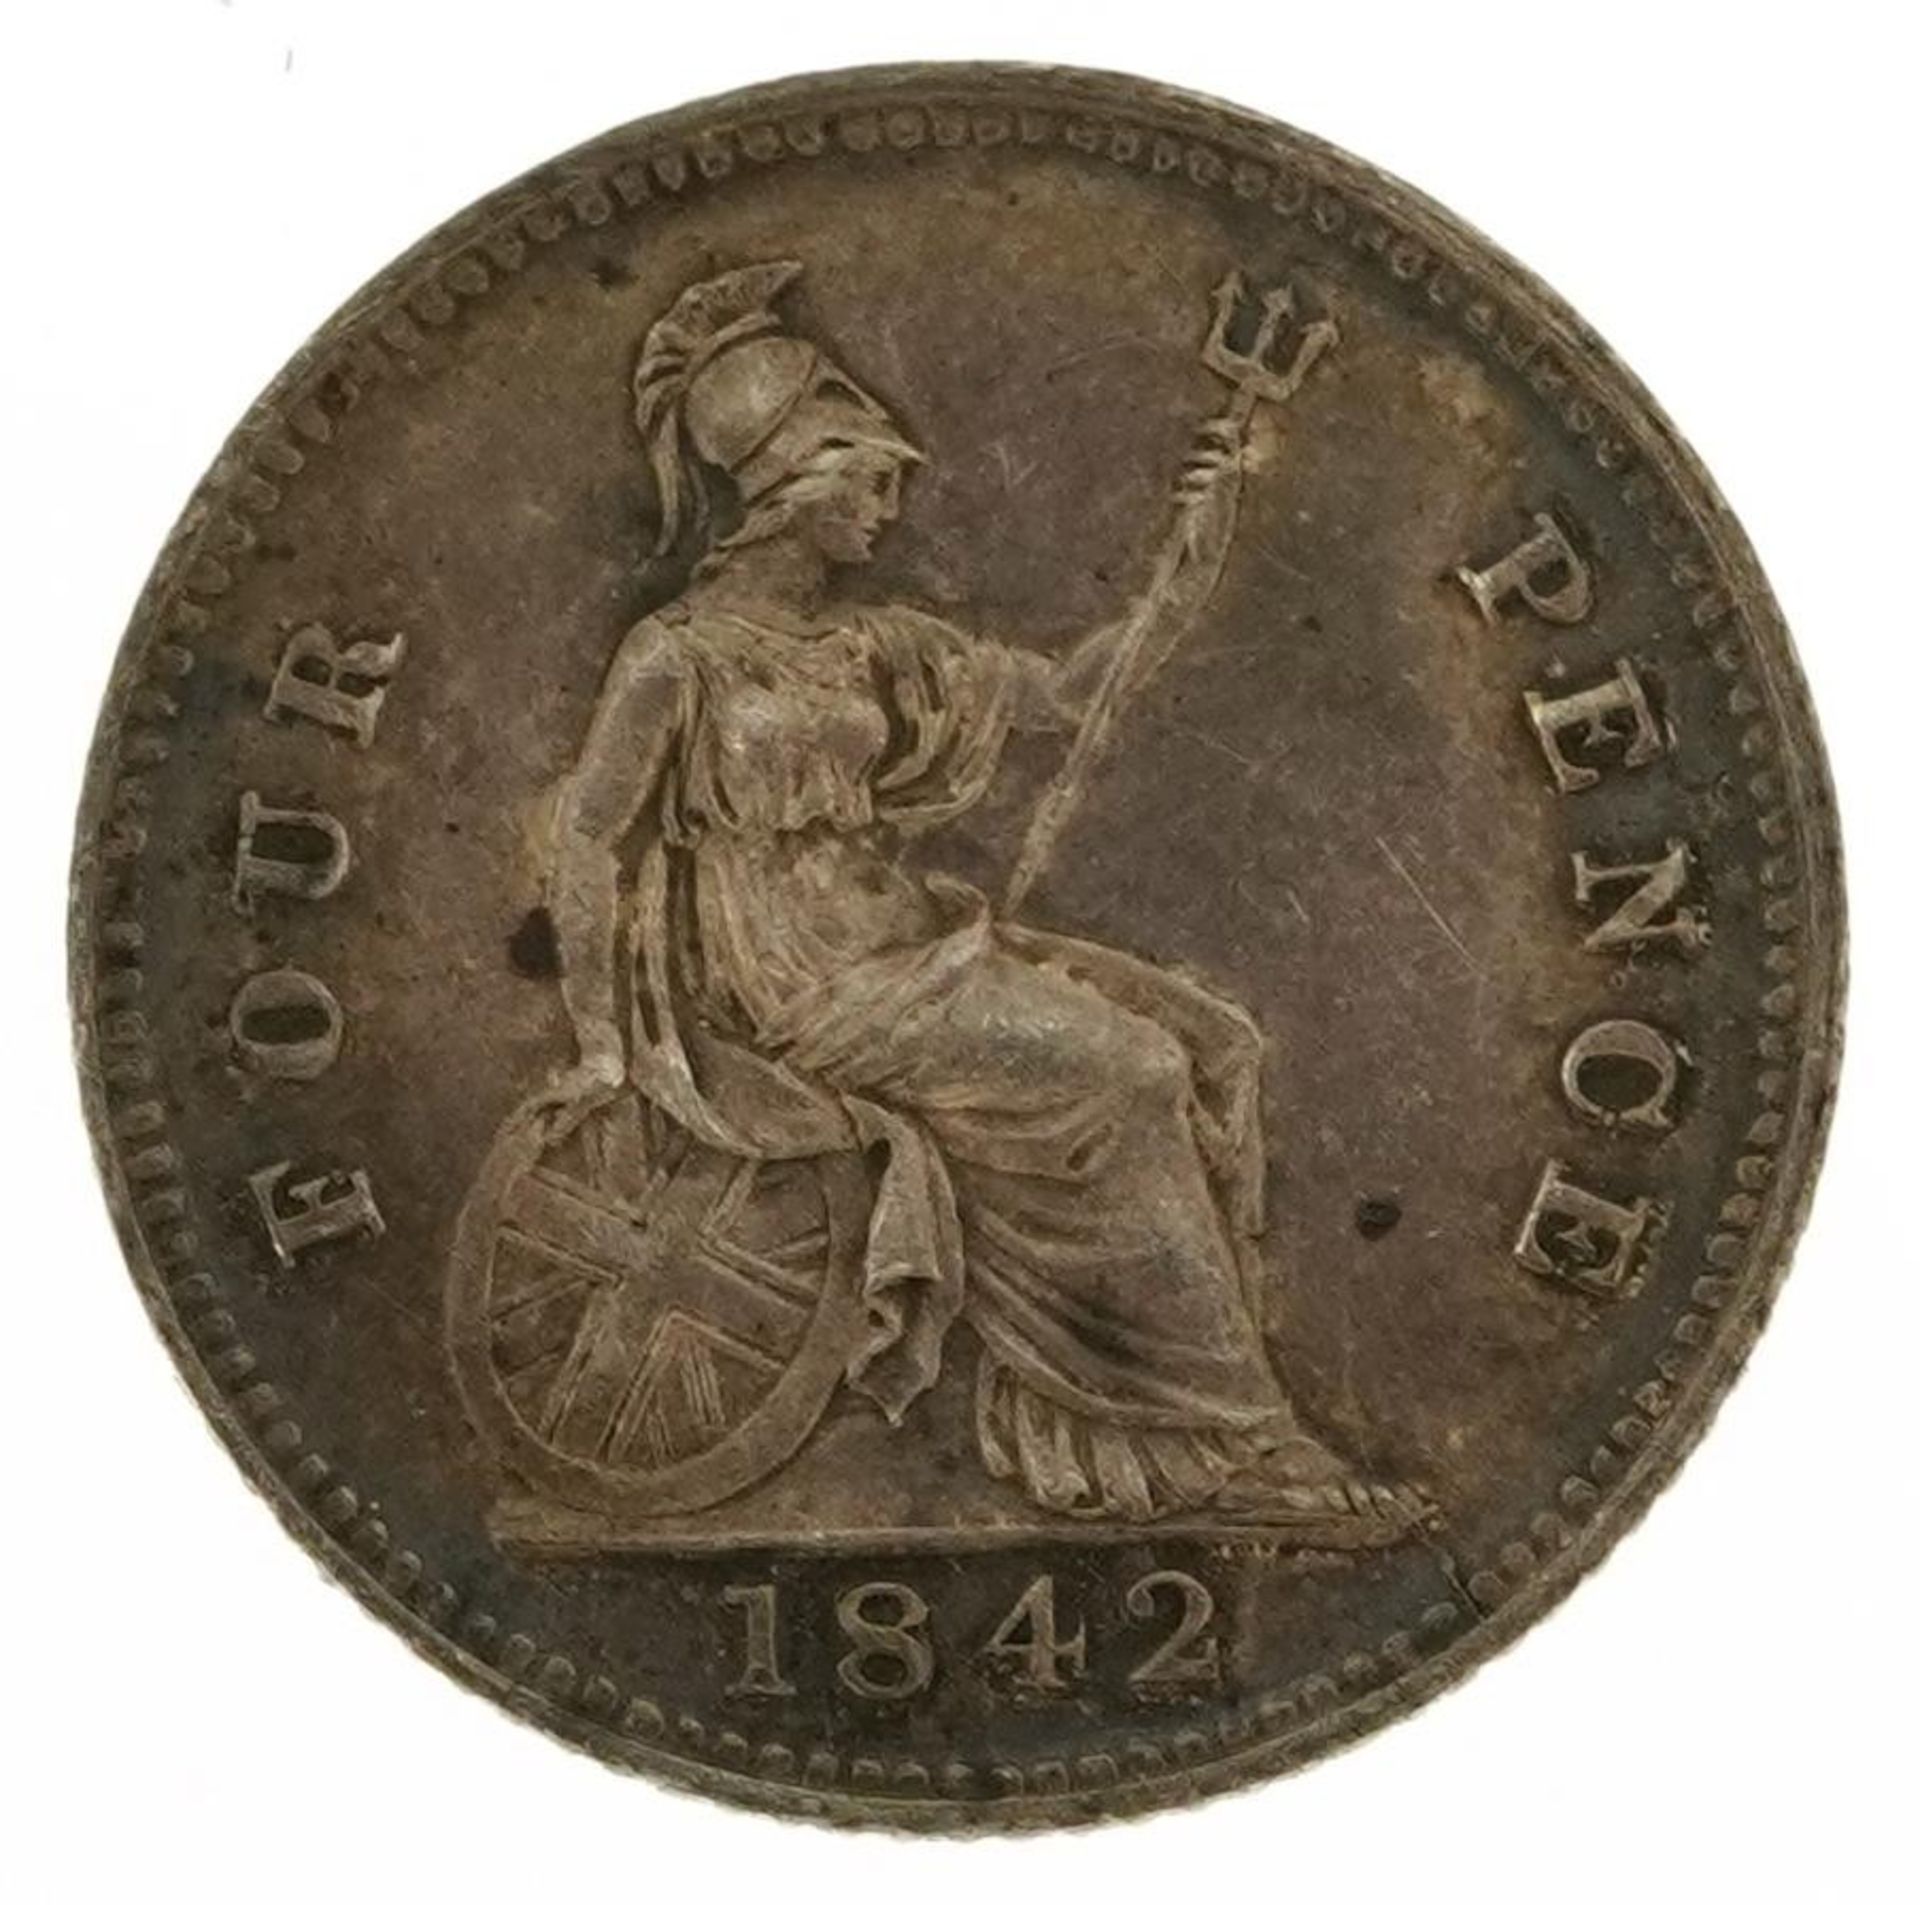 Victoria Young Head 1842 fourpence : For further information on this lot please visit